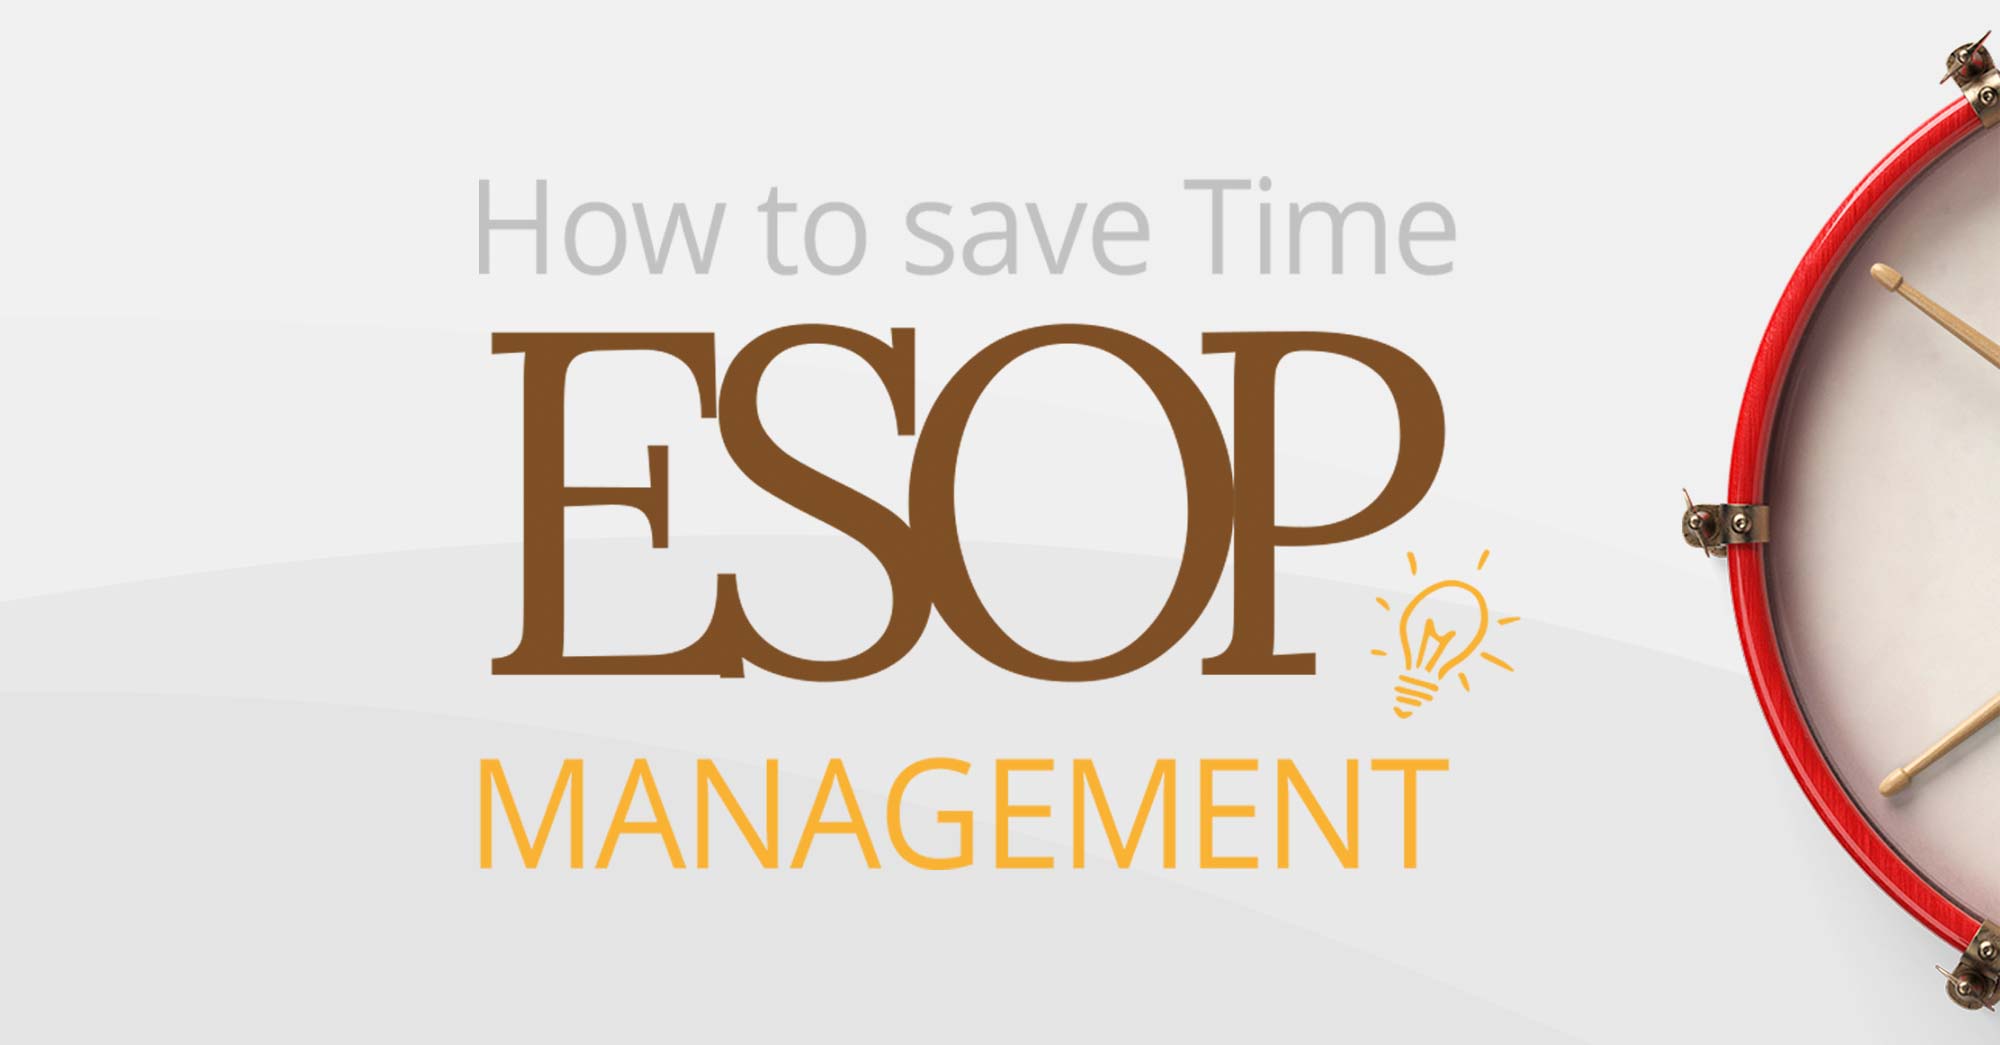 ESOP planning 2022: our checklist to save you time